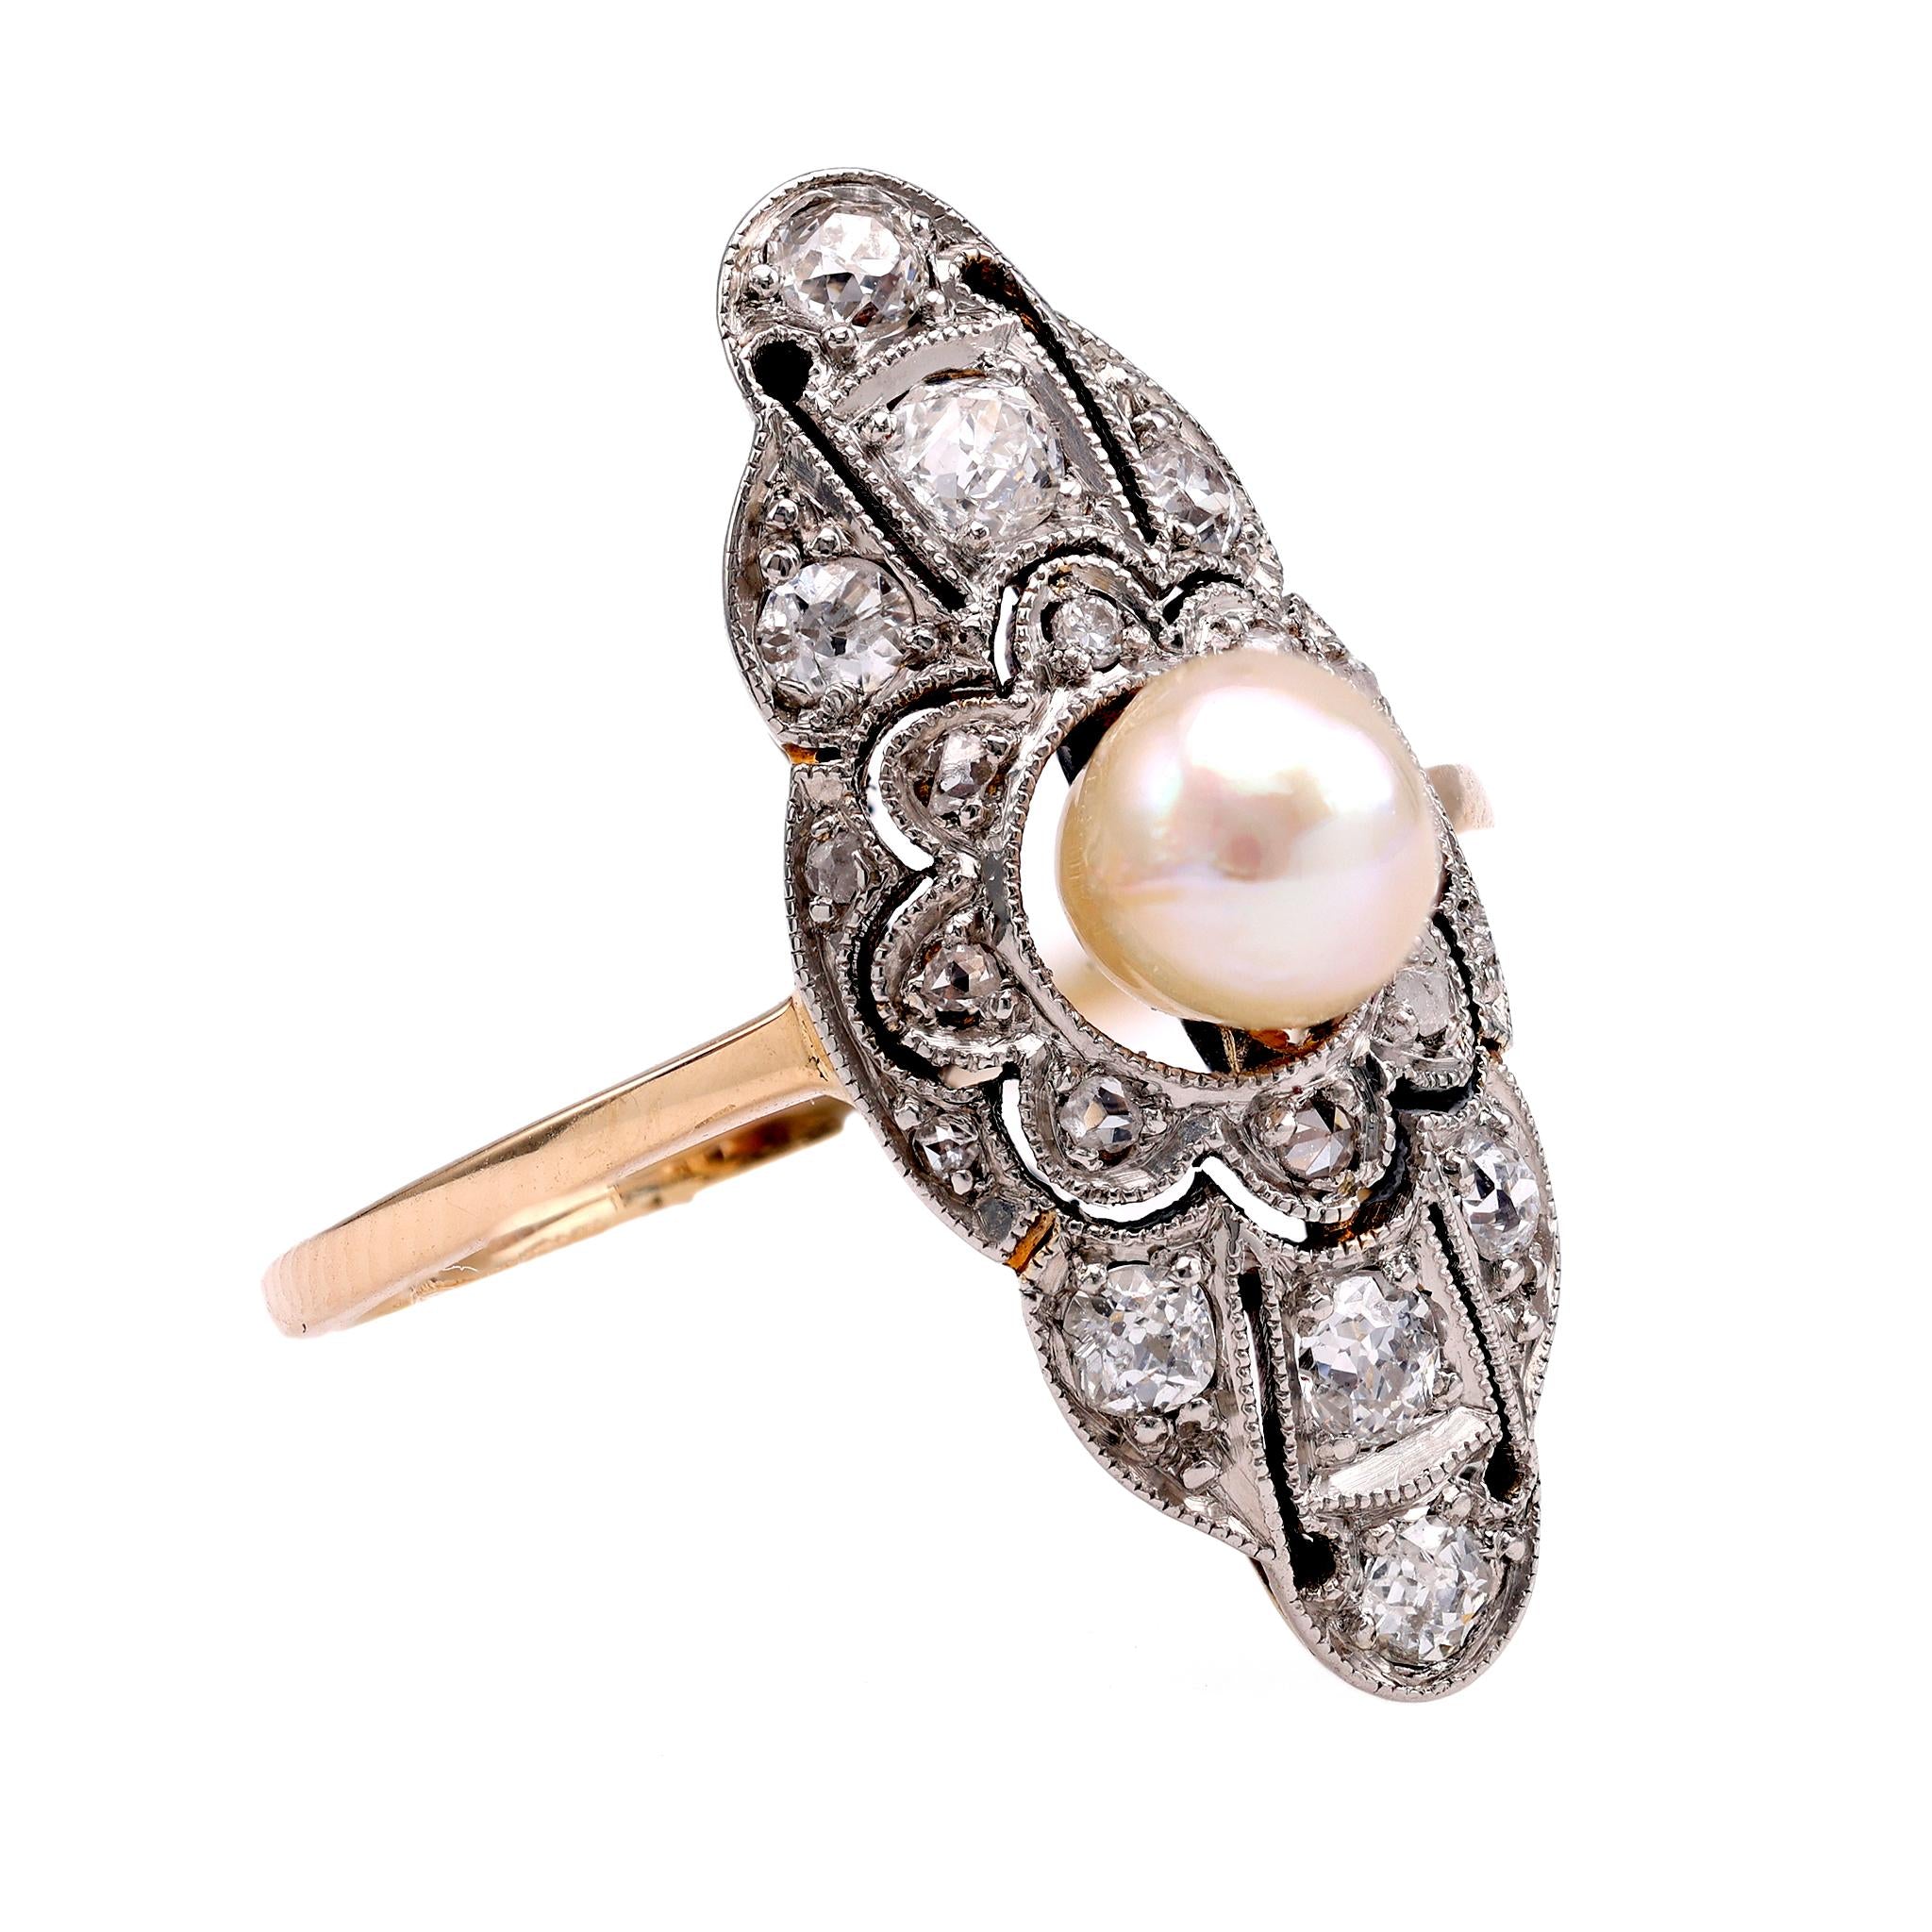 Pearl and Diamond Navette Ring